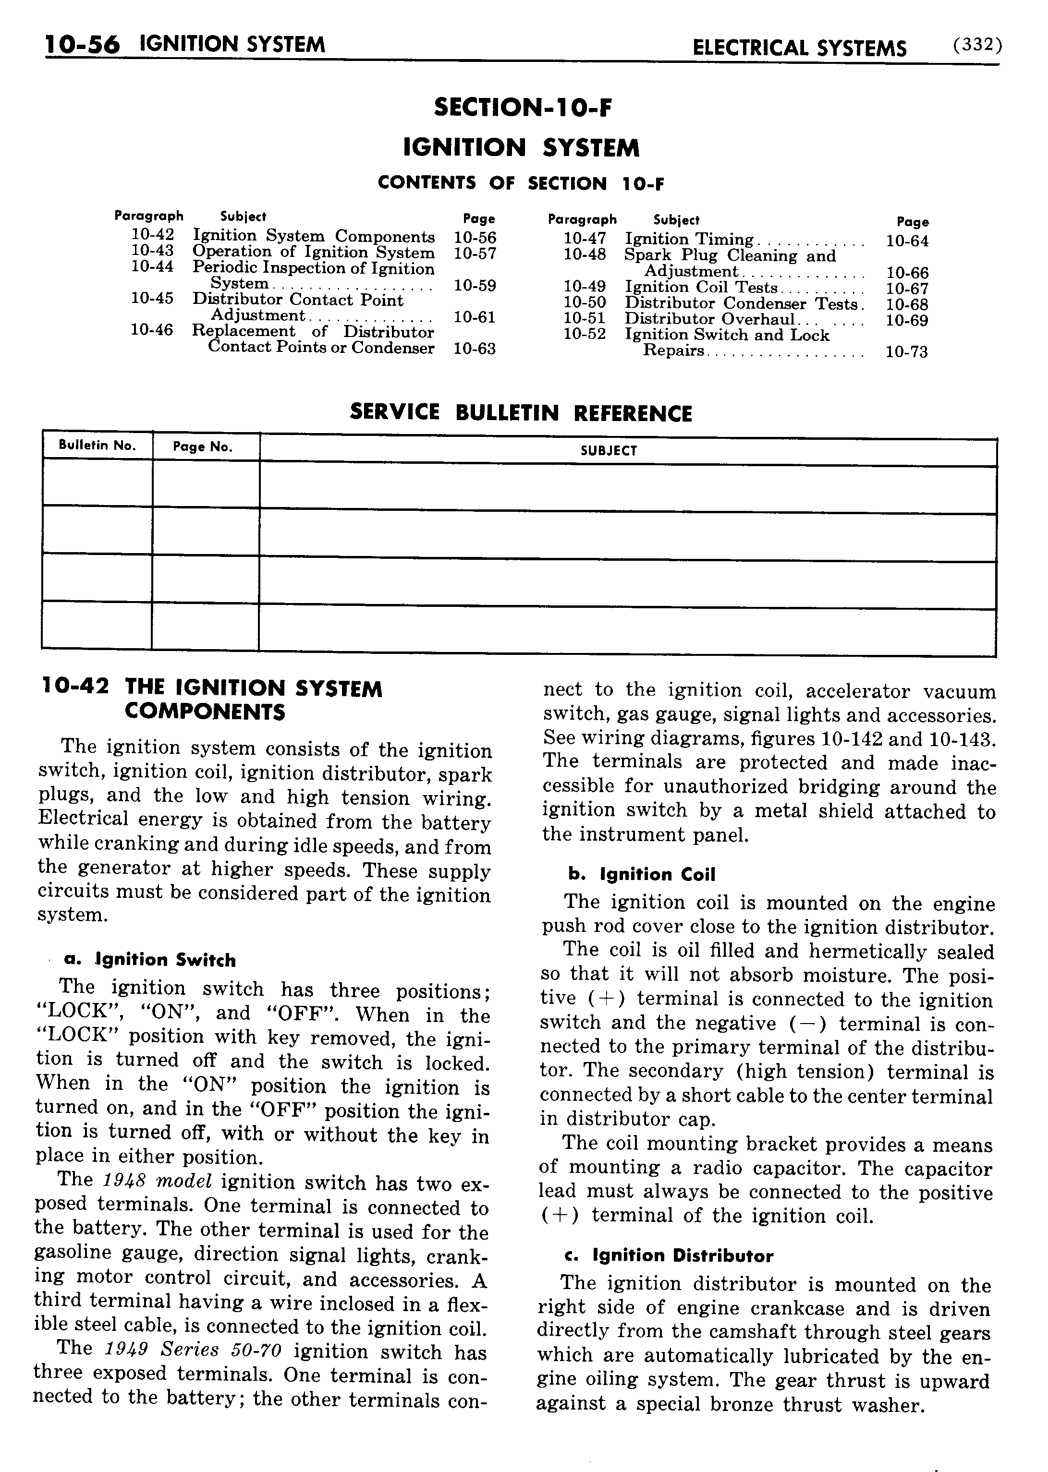 n_11 1948 Buick Shop Manual - Electrical Systems-056-056.jpg